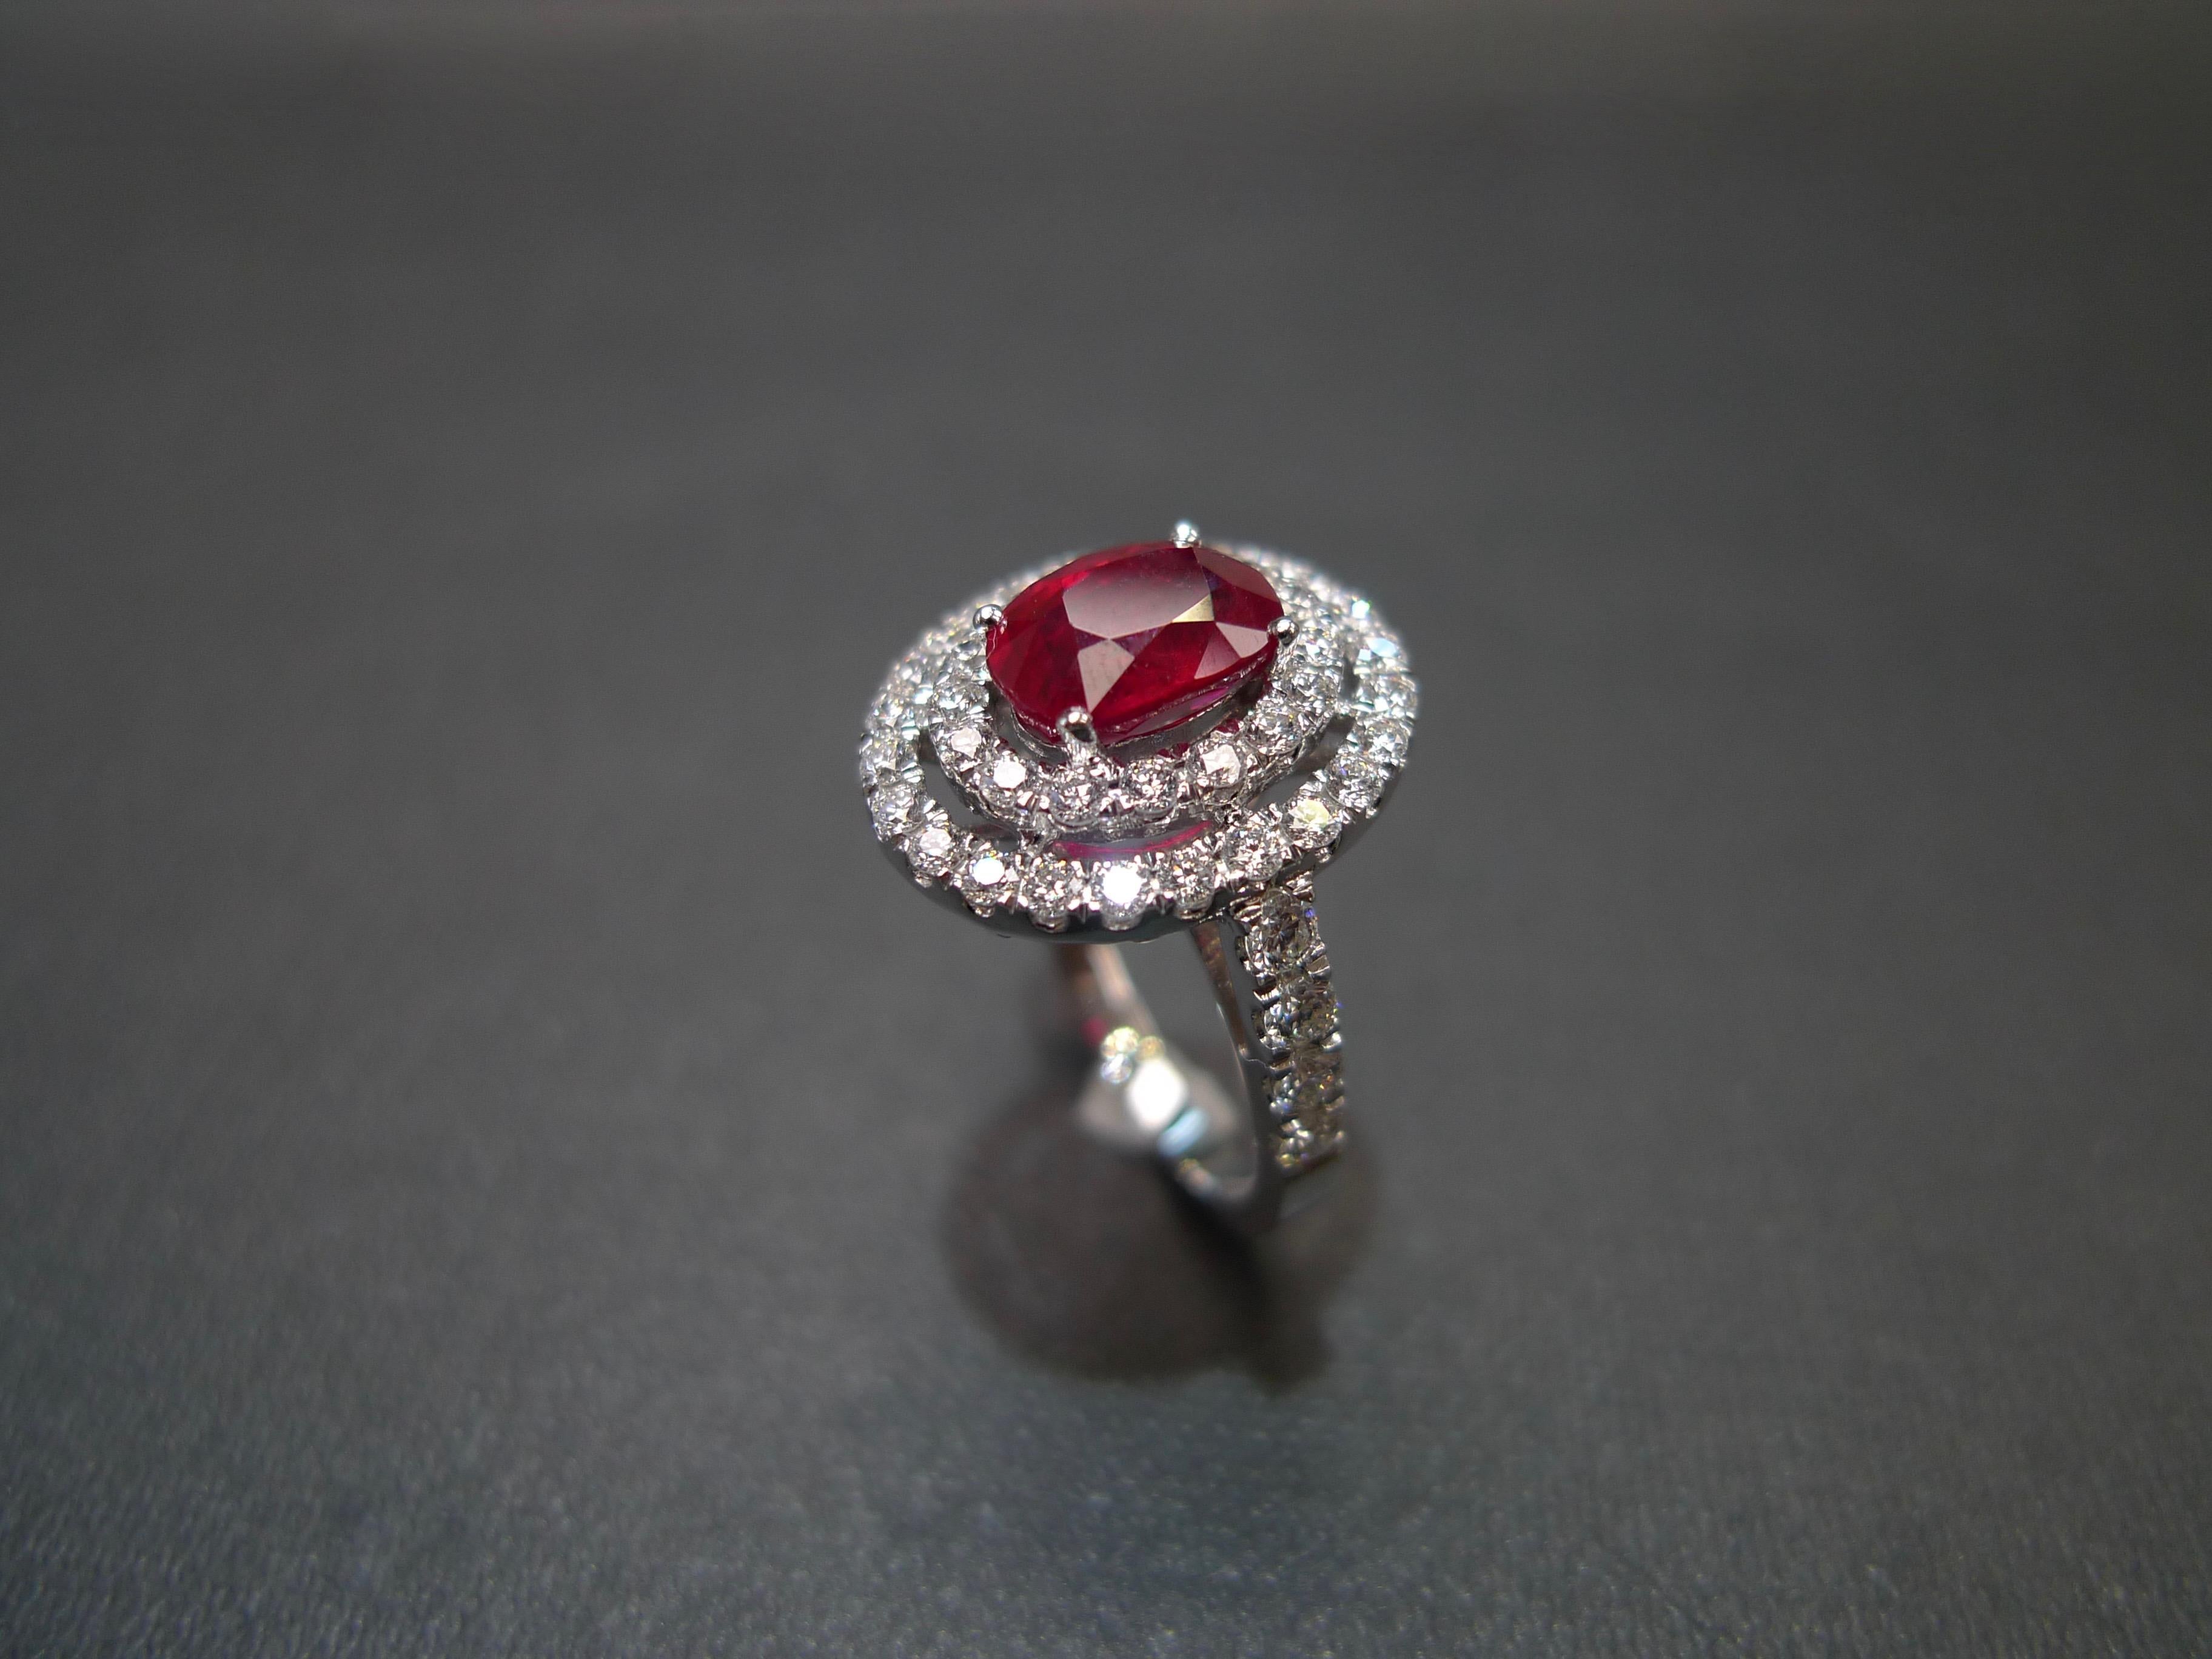 GIA Certificated 2.03 Carat Ruby Vivid Red Pigeon Blood Burma and Diamond Ring For Sale 1